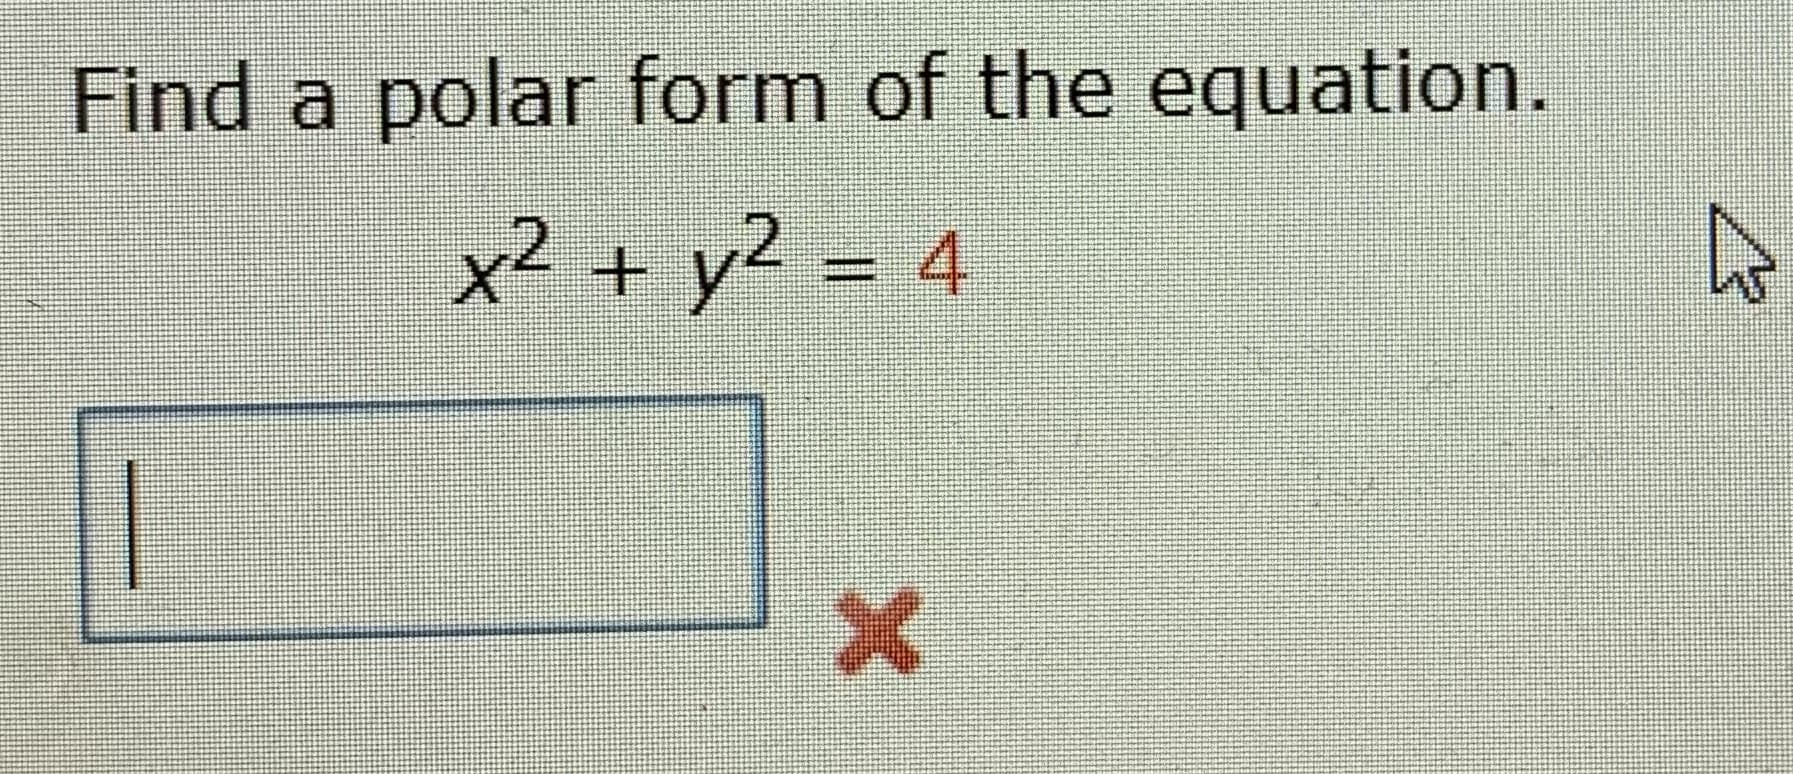 Find a polar form of the equation.
x² + y² = 4
